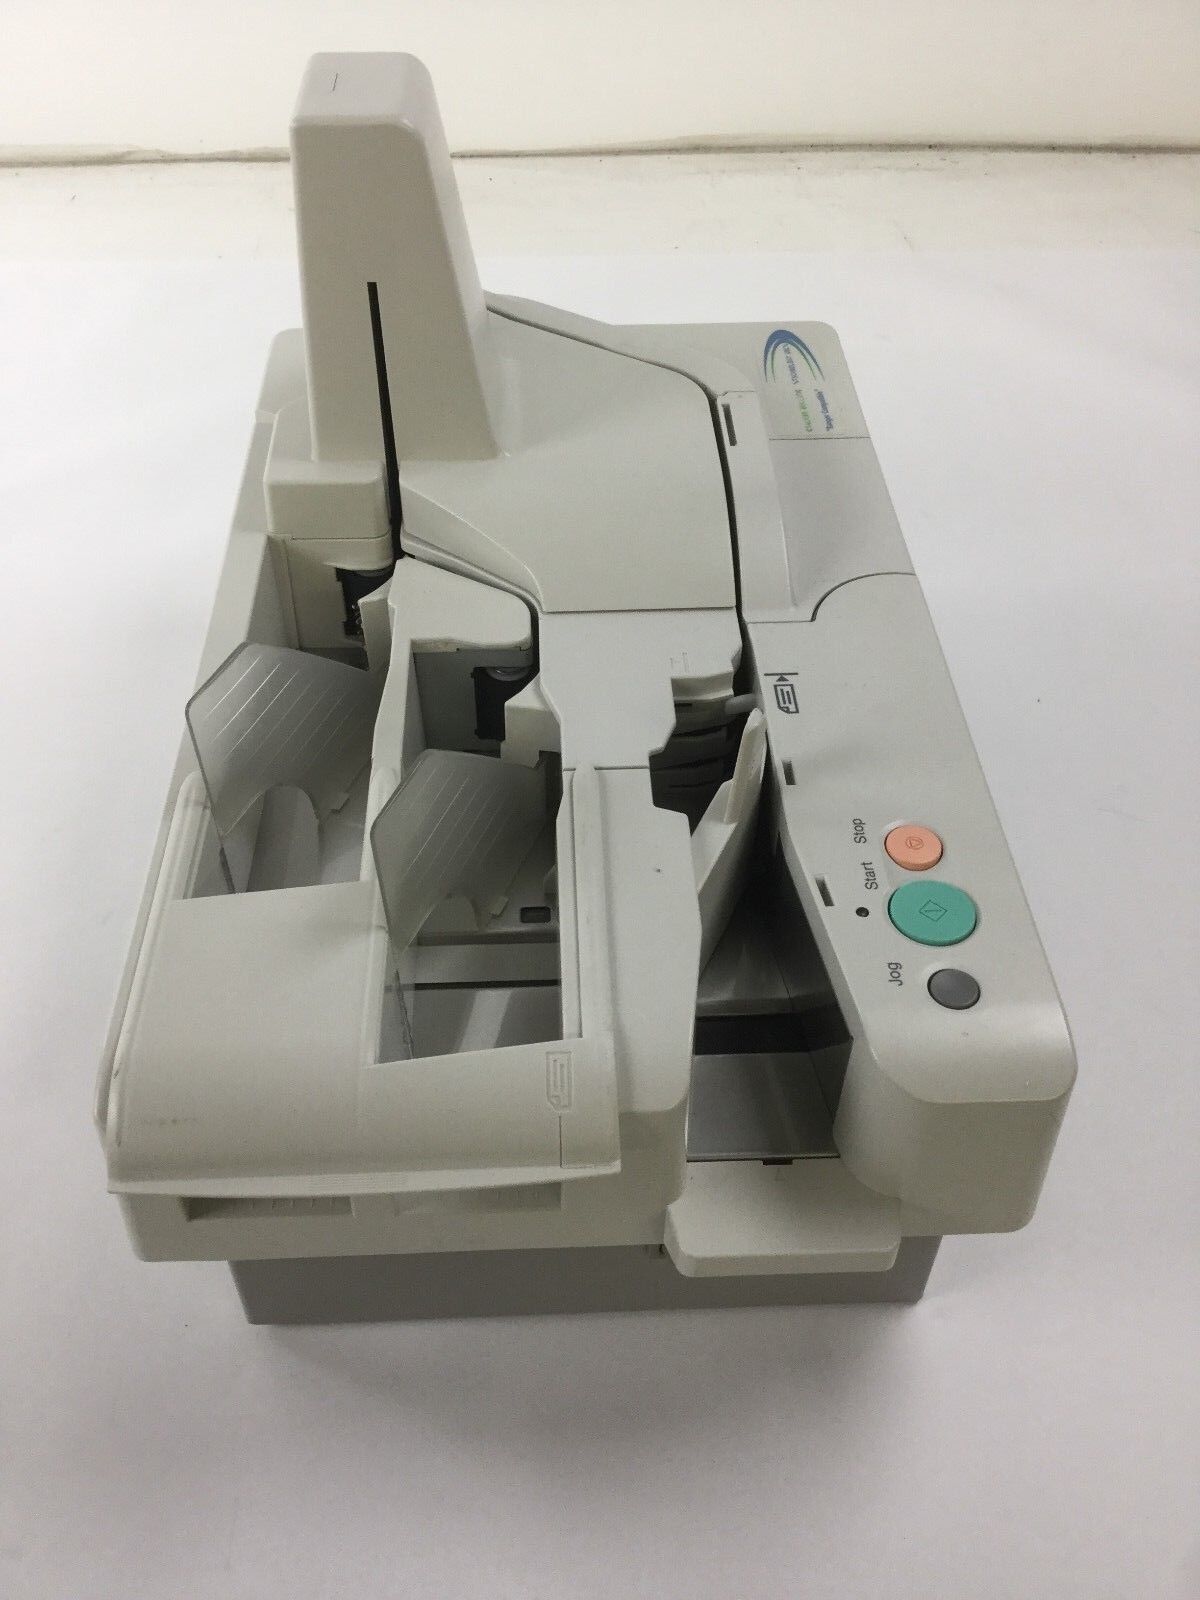 Canon CR180 Check Scanner, Jog Button Does Not Work, No Power Supply